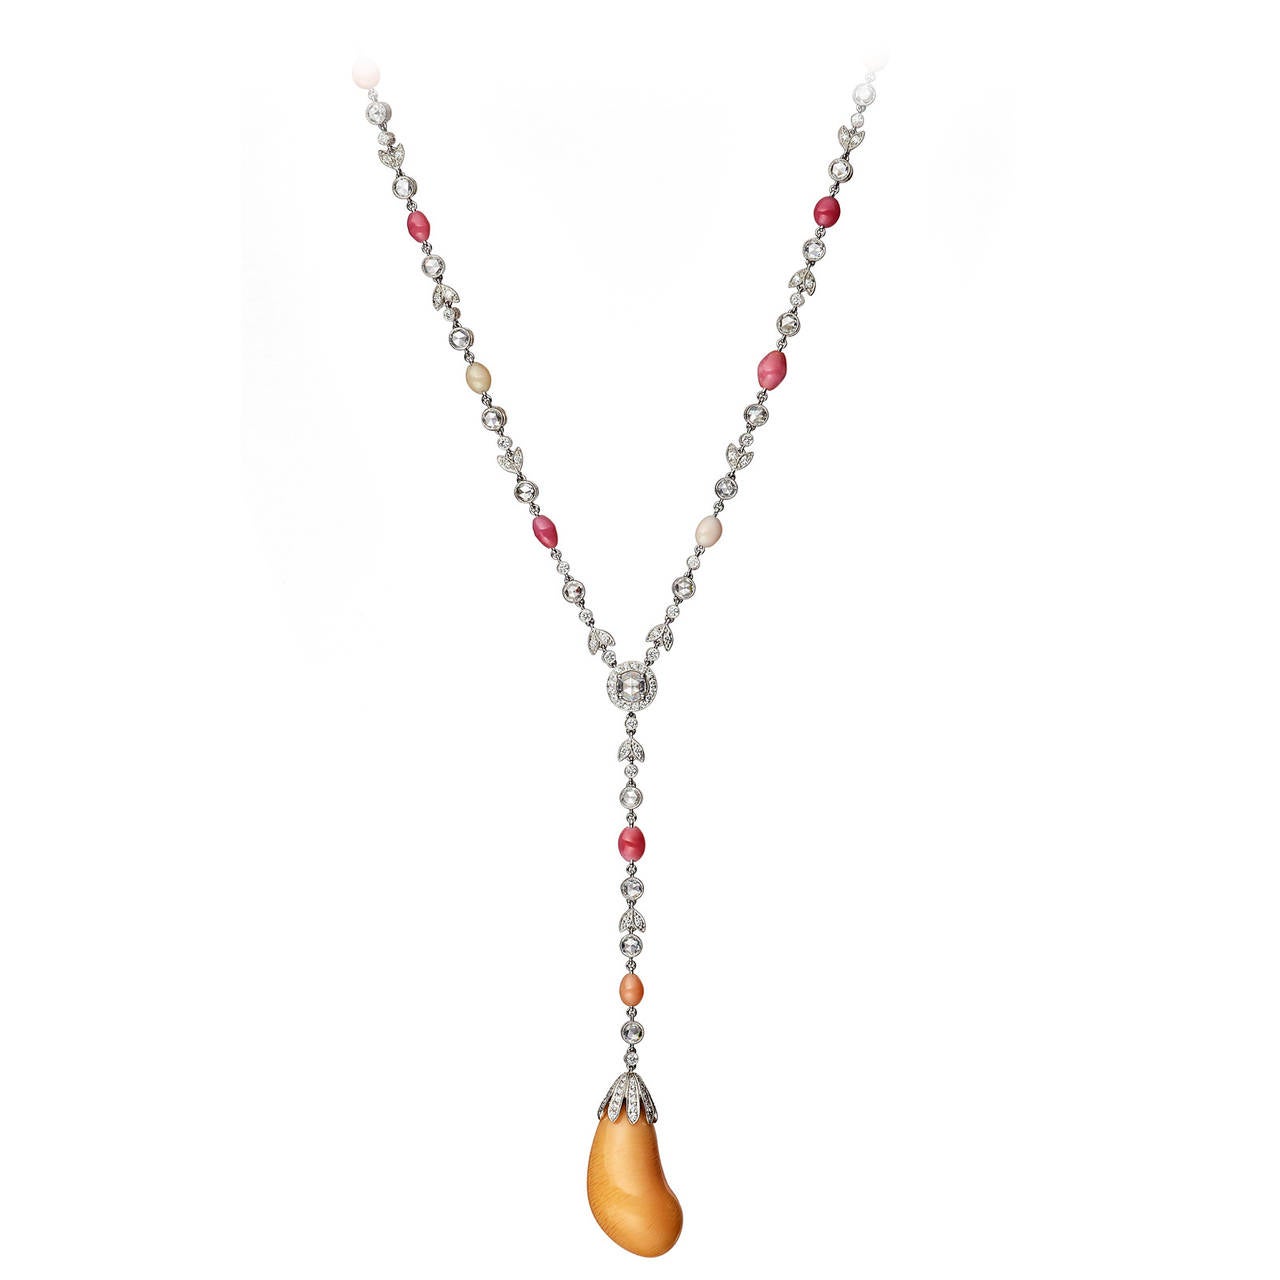 Magnificent Melo pearl necklace